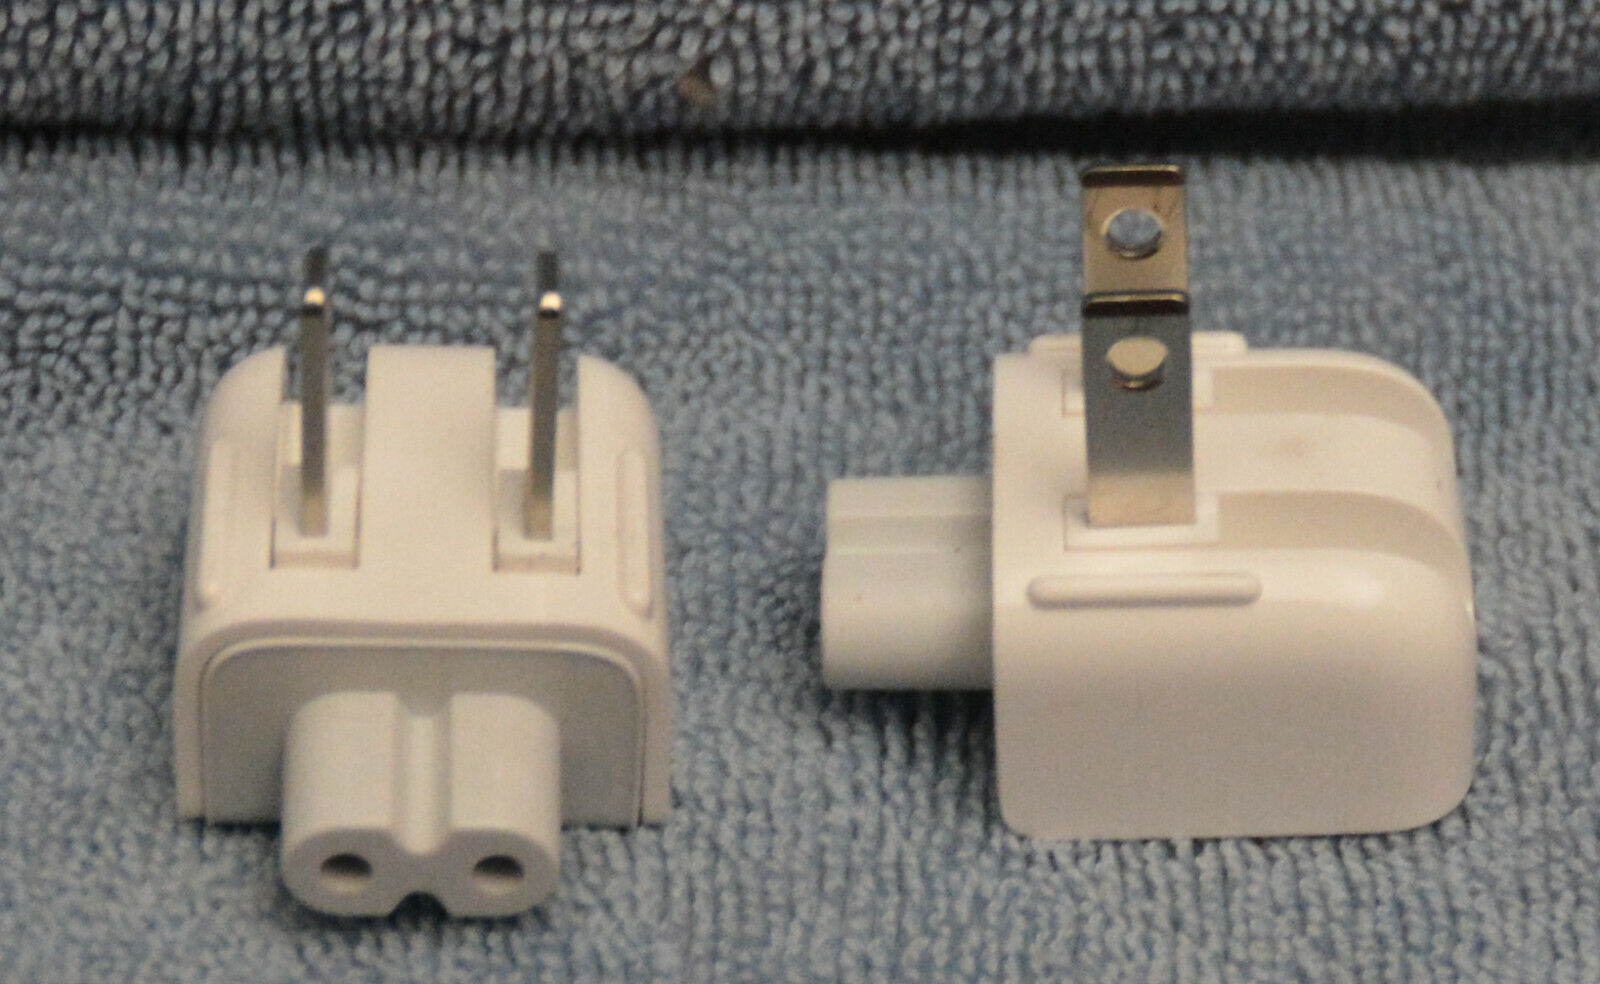 Pair of Apple Duck Head AC Adapter Plug Charger Connectors